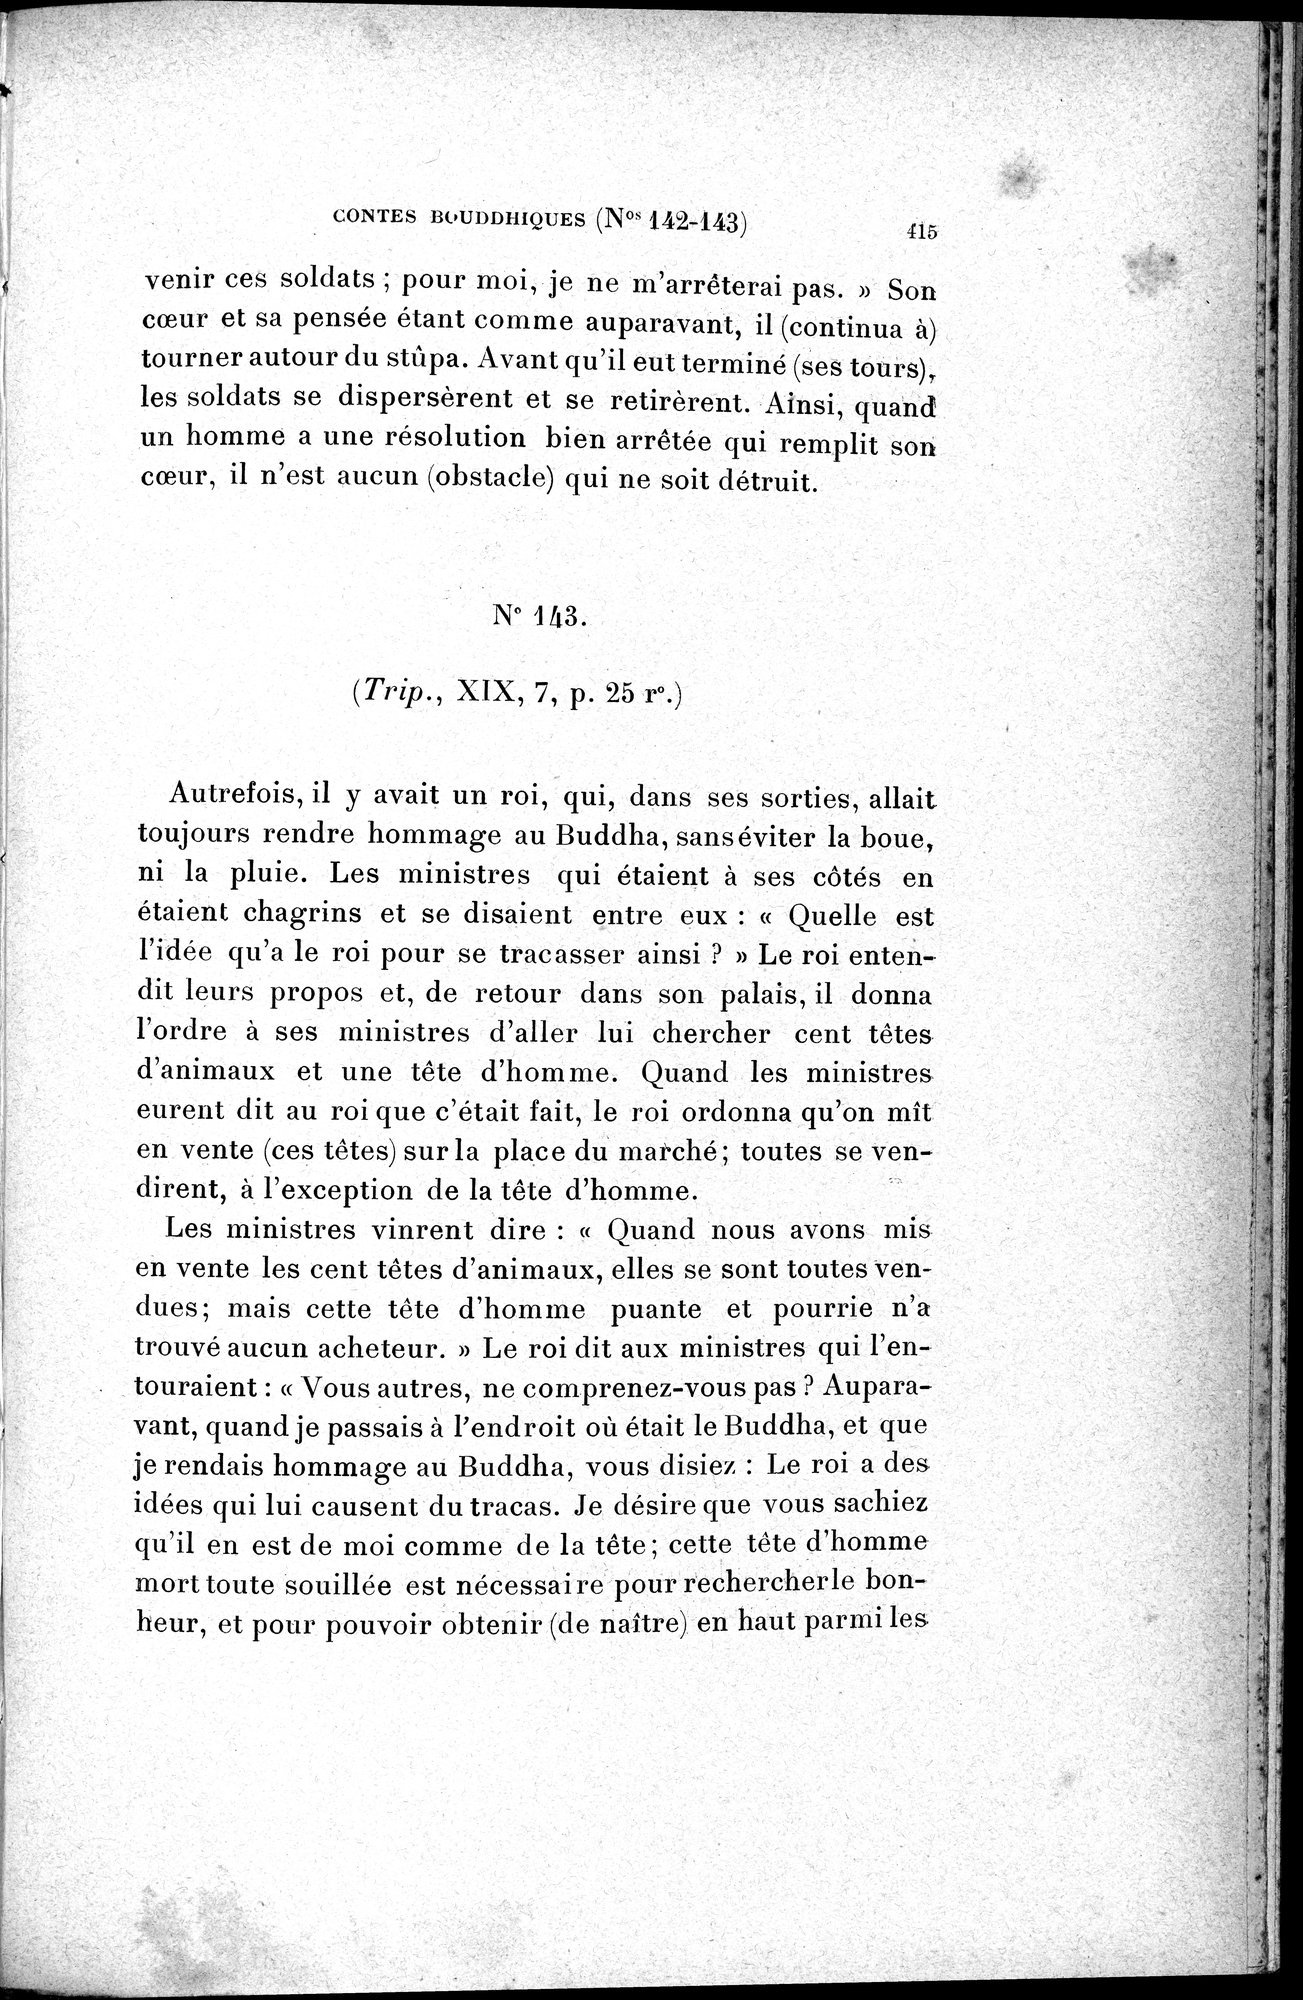 Cinq Cents Contes et Apologues : vol.1 / Page 449 (Grayscale High Resolution Image)